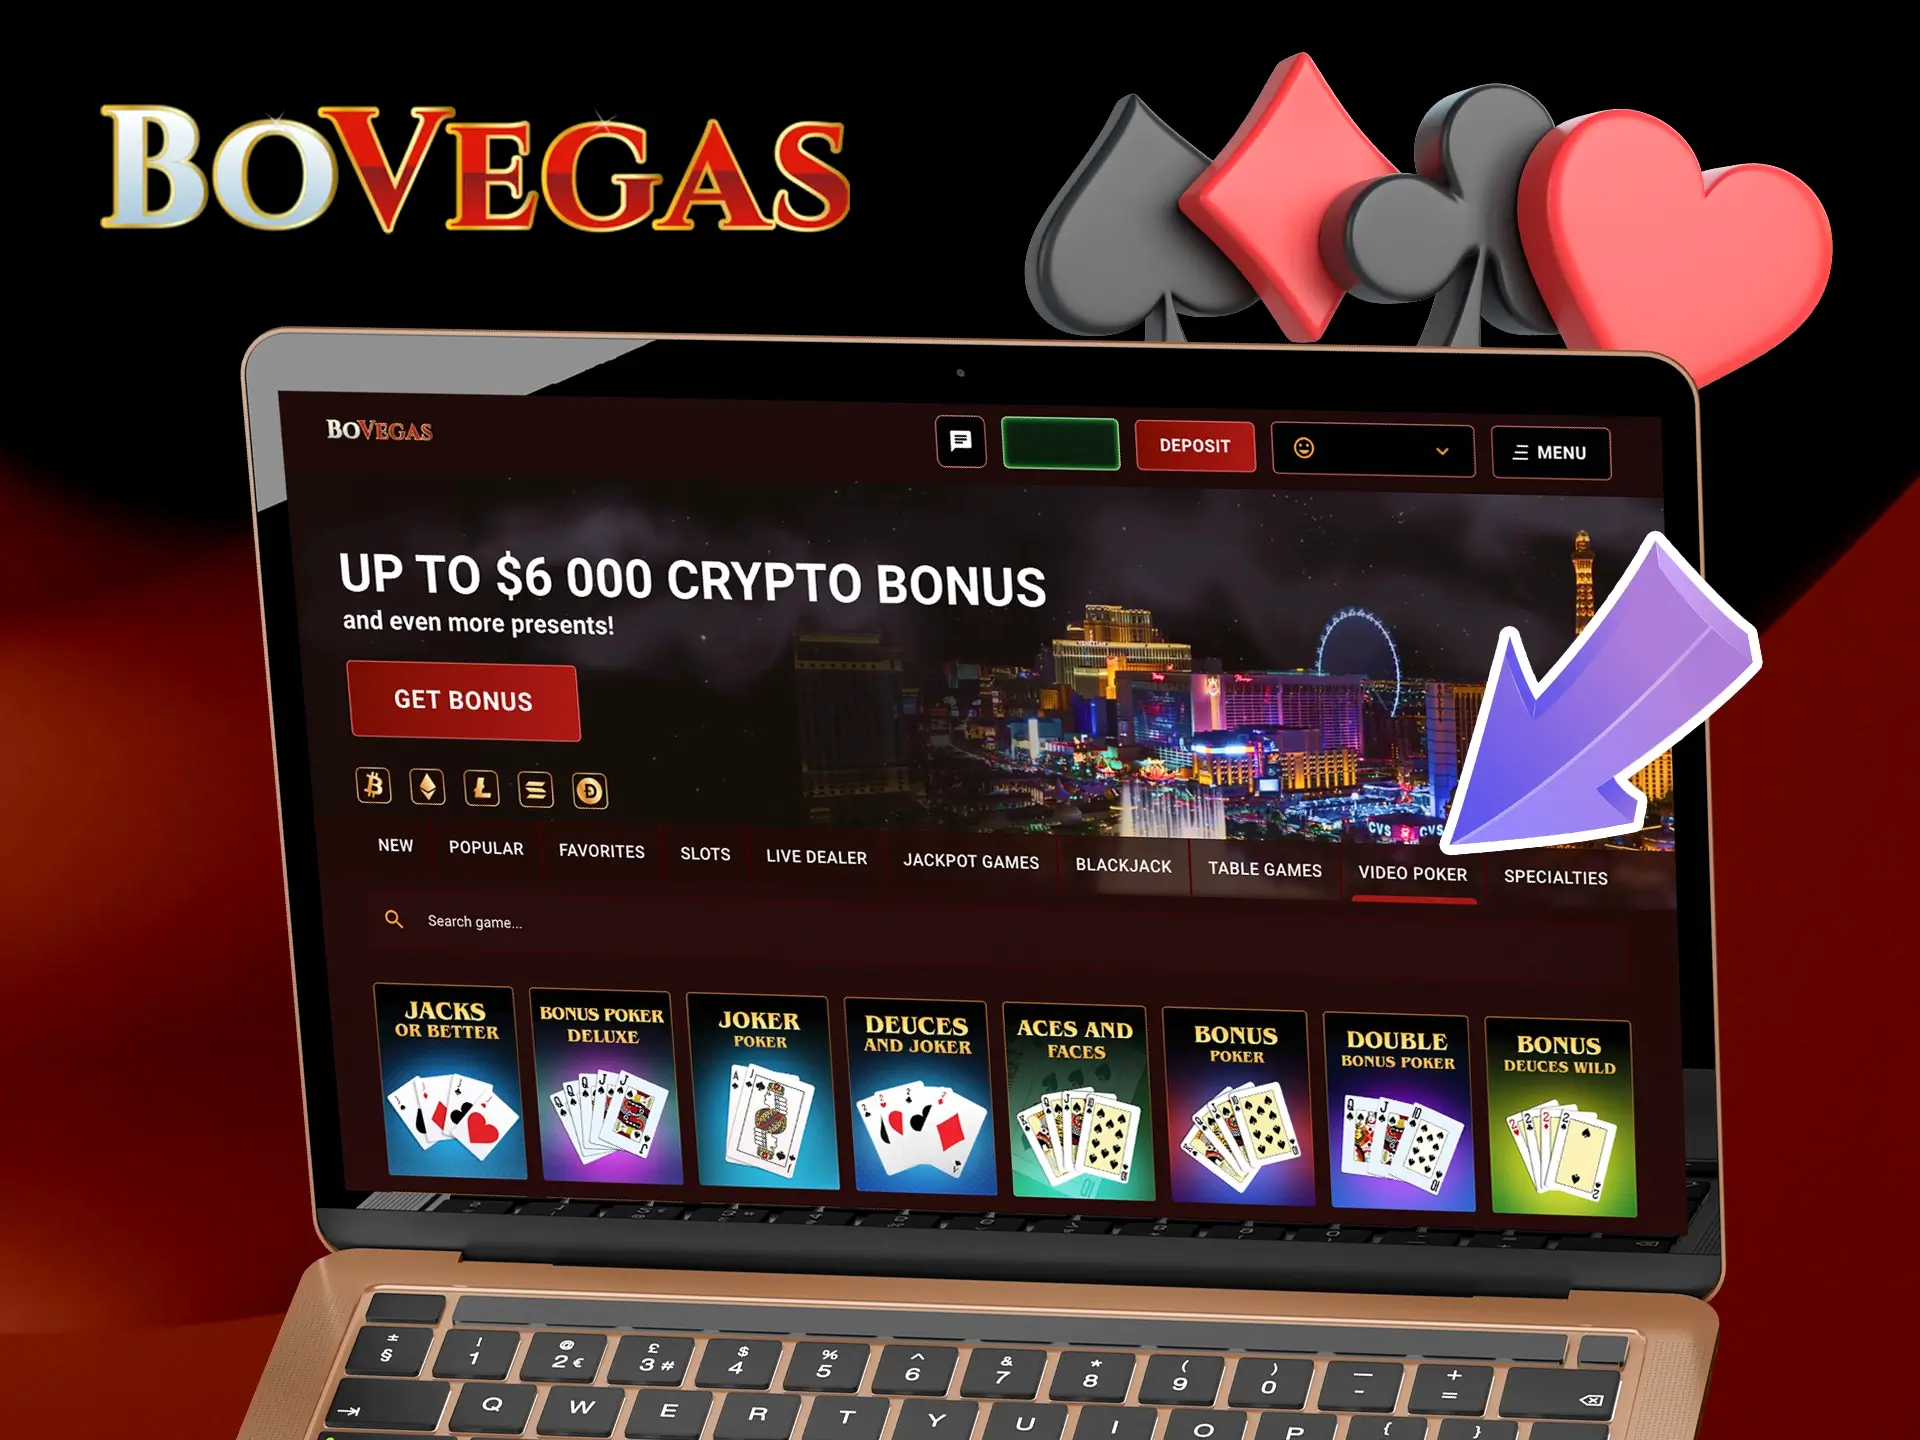 Log in to your personal BoVegas Casino account and start playing and competing in poker.